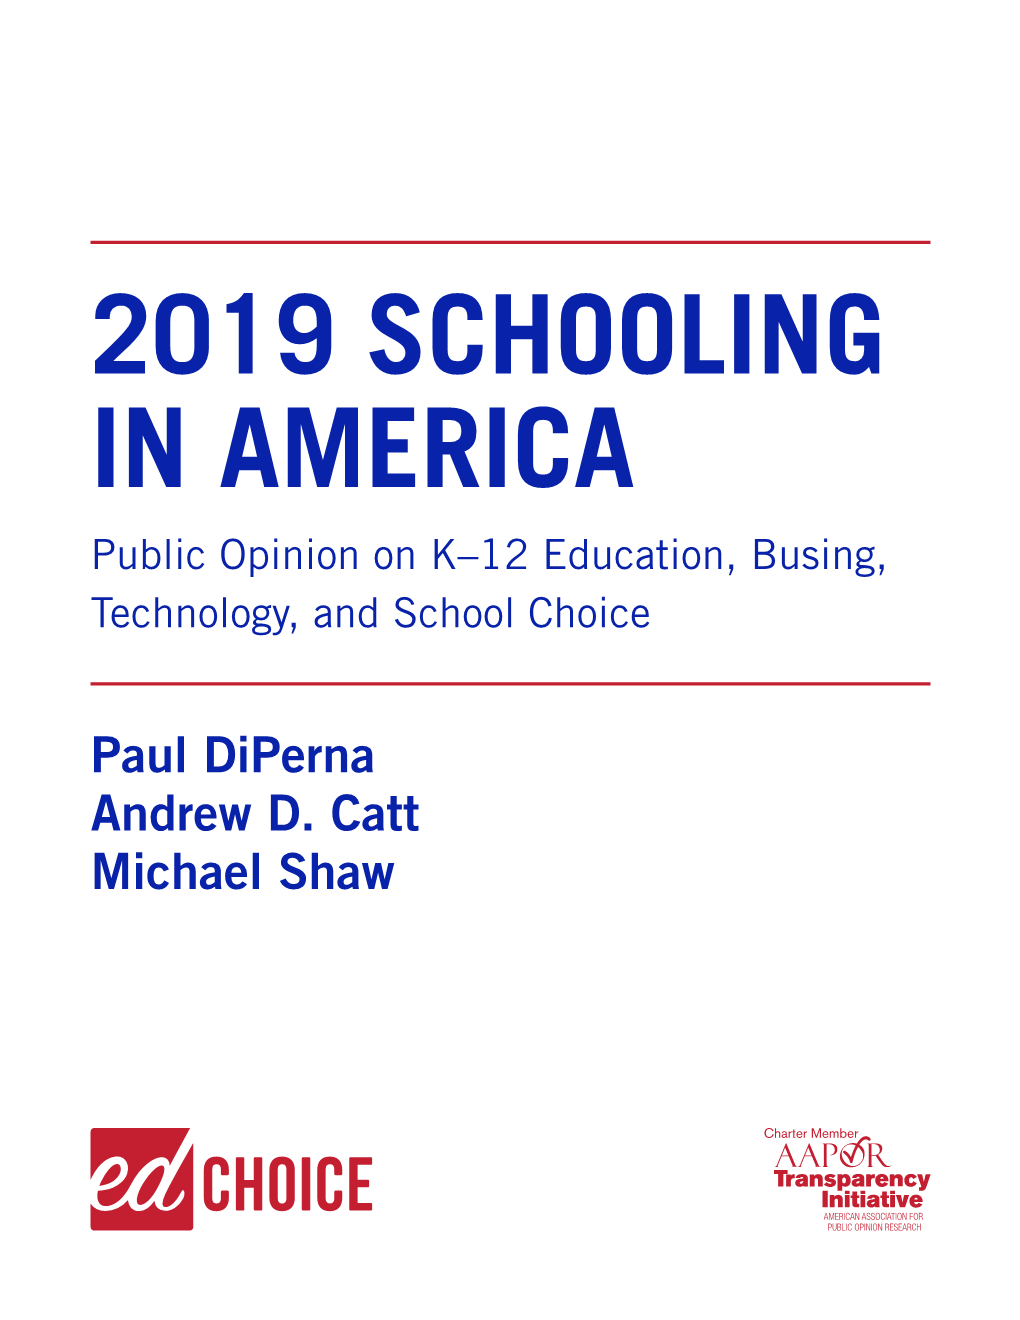 2019 Schooling in America Survey Project Was Is ± 3.8 Percentage Points